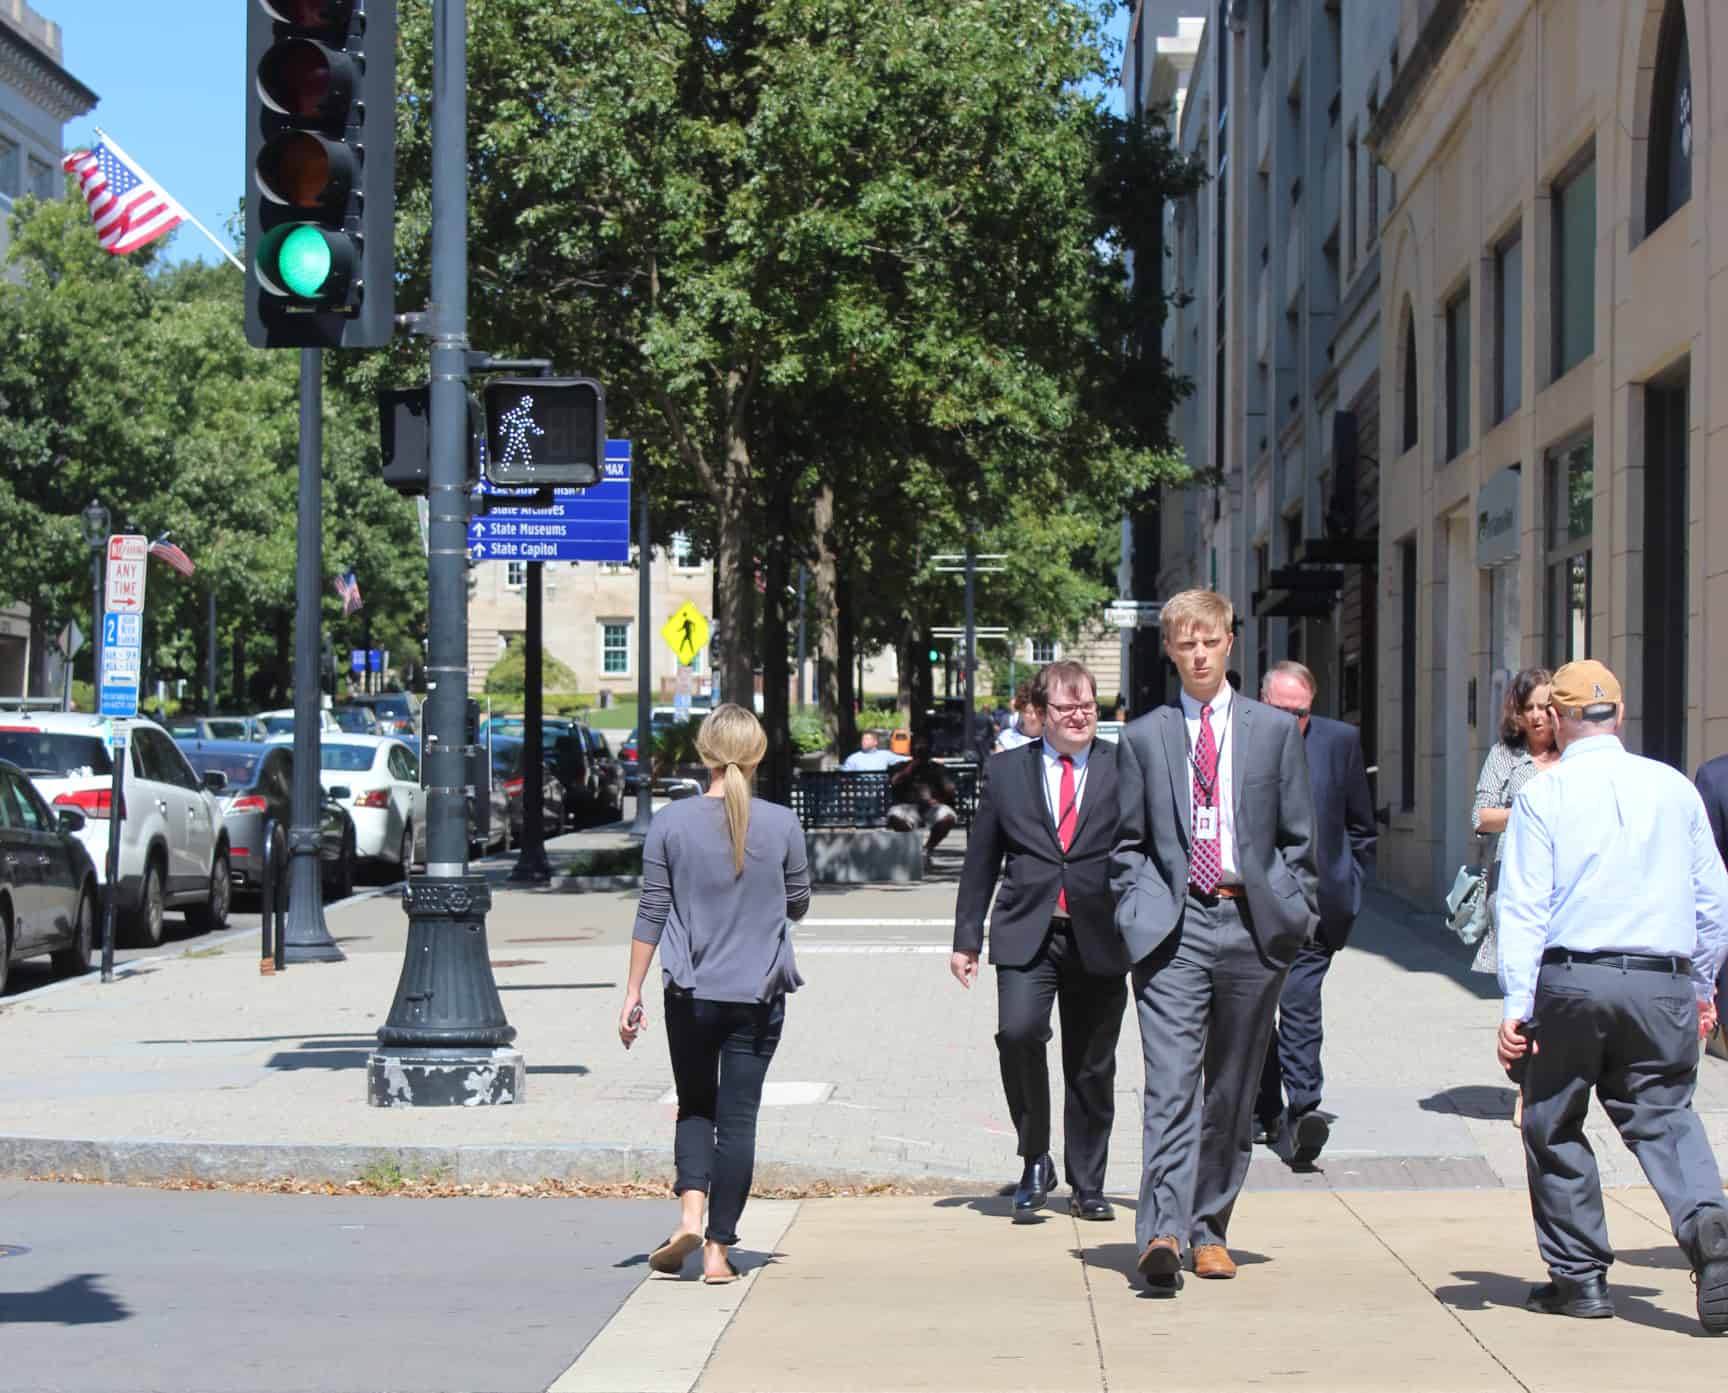 Pedestrians crossing a street in Downtown Raleigh